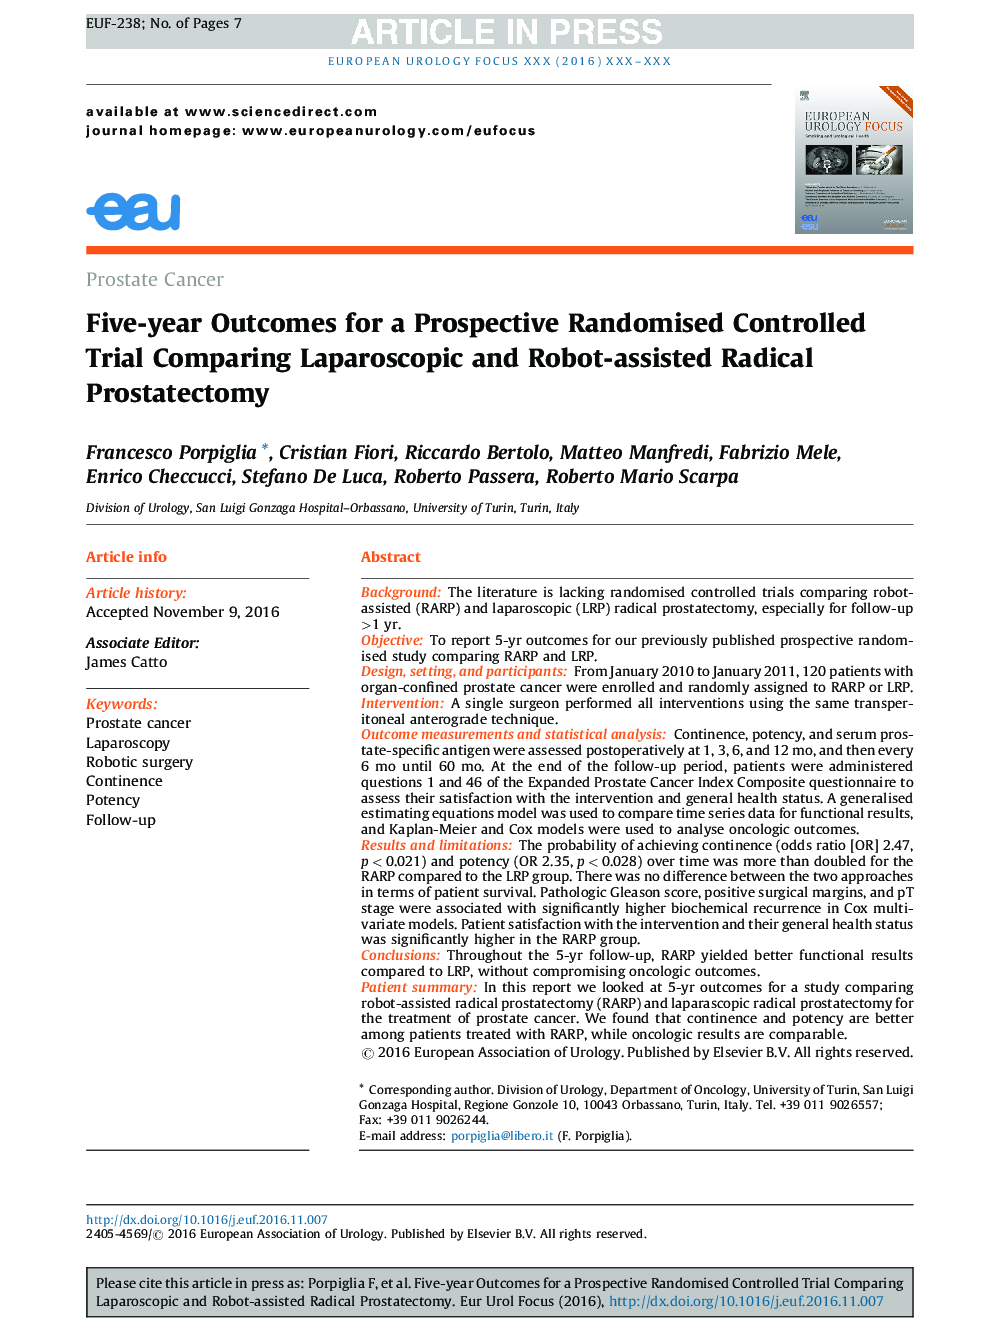 Five-year Outcomes for a Prospective Randomised Controlled Trial Comparing Laparoscopic and Robot-assisted Radical Prostatectomy